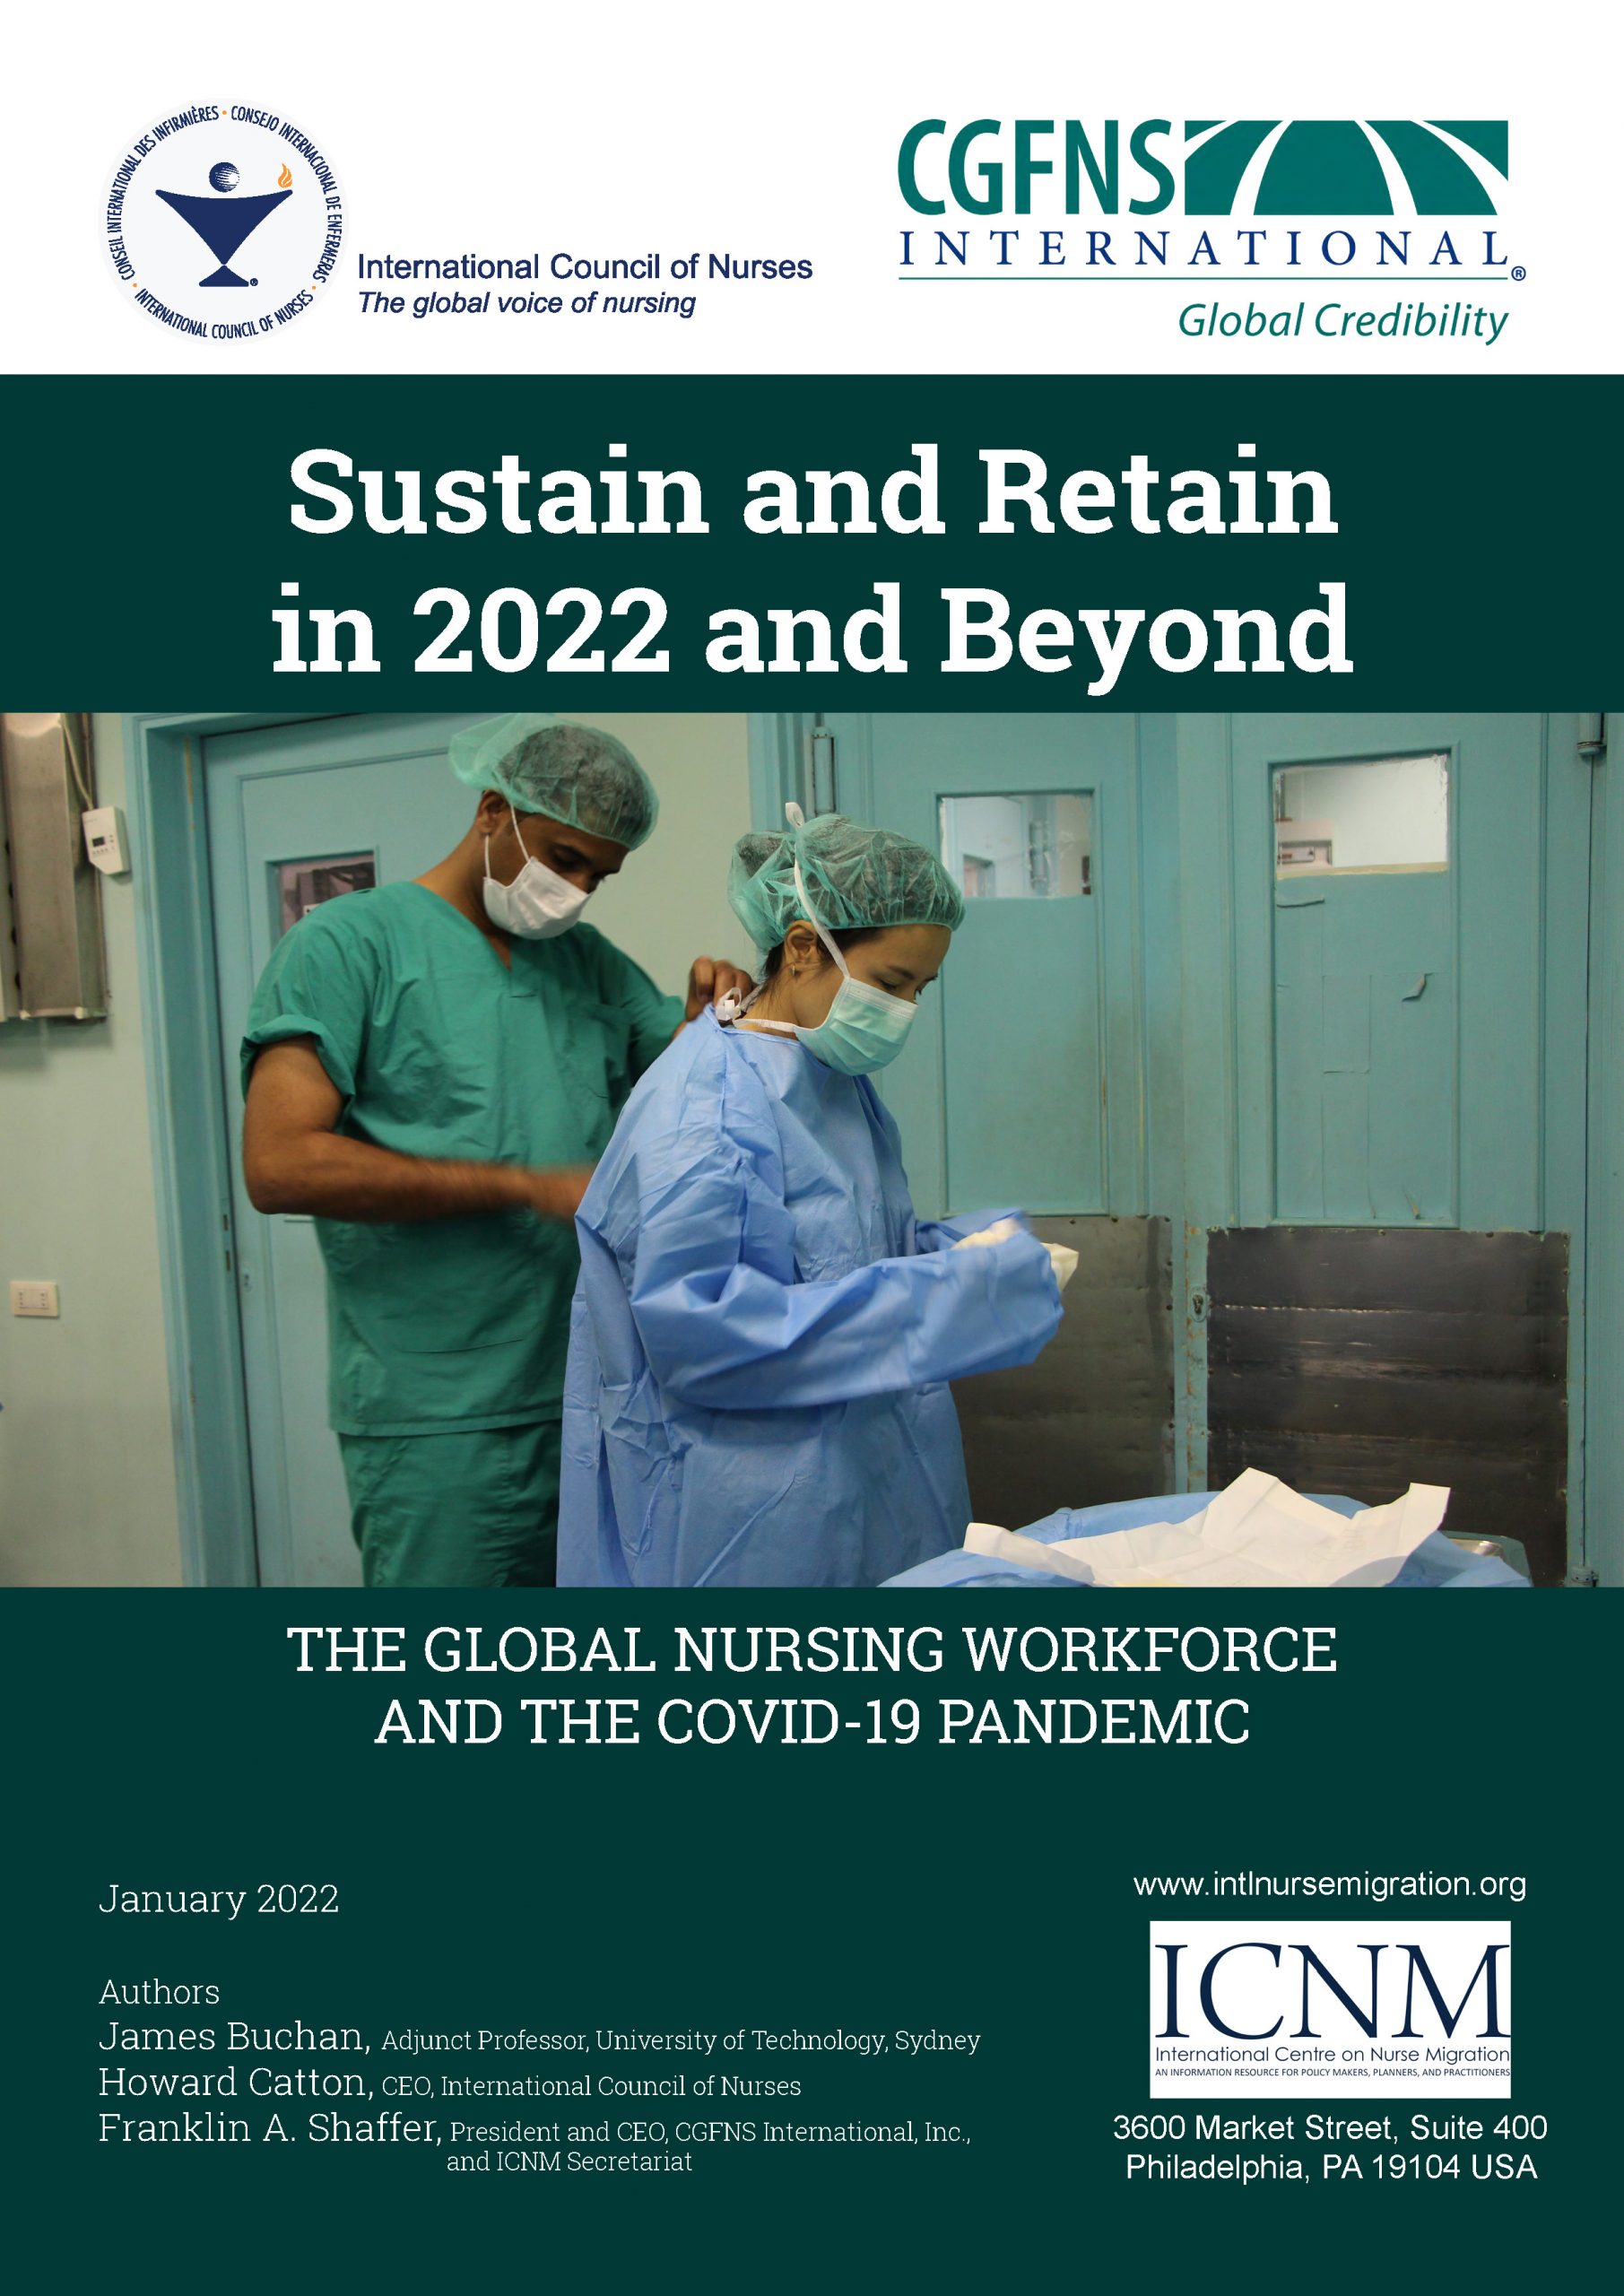 Assessing the lingering impact of COVID-19 on the nursing workforce